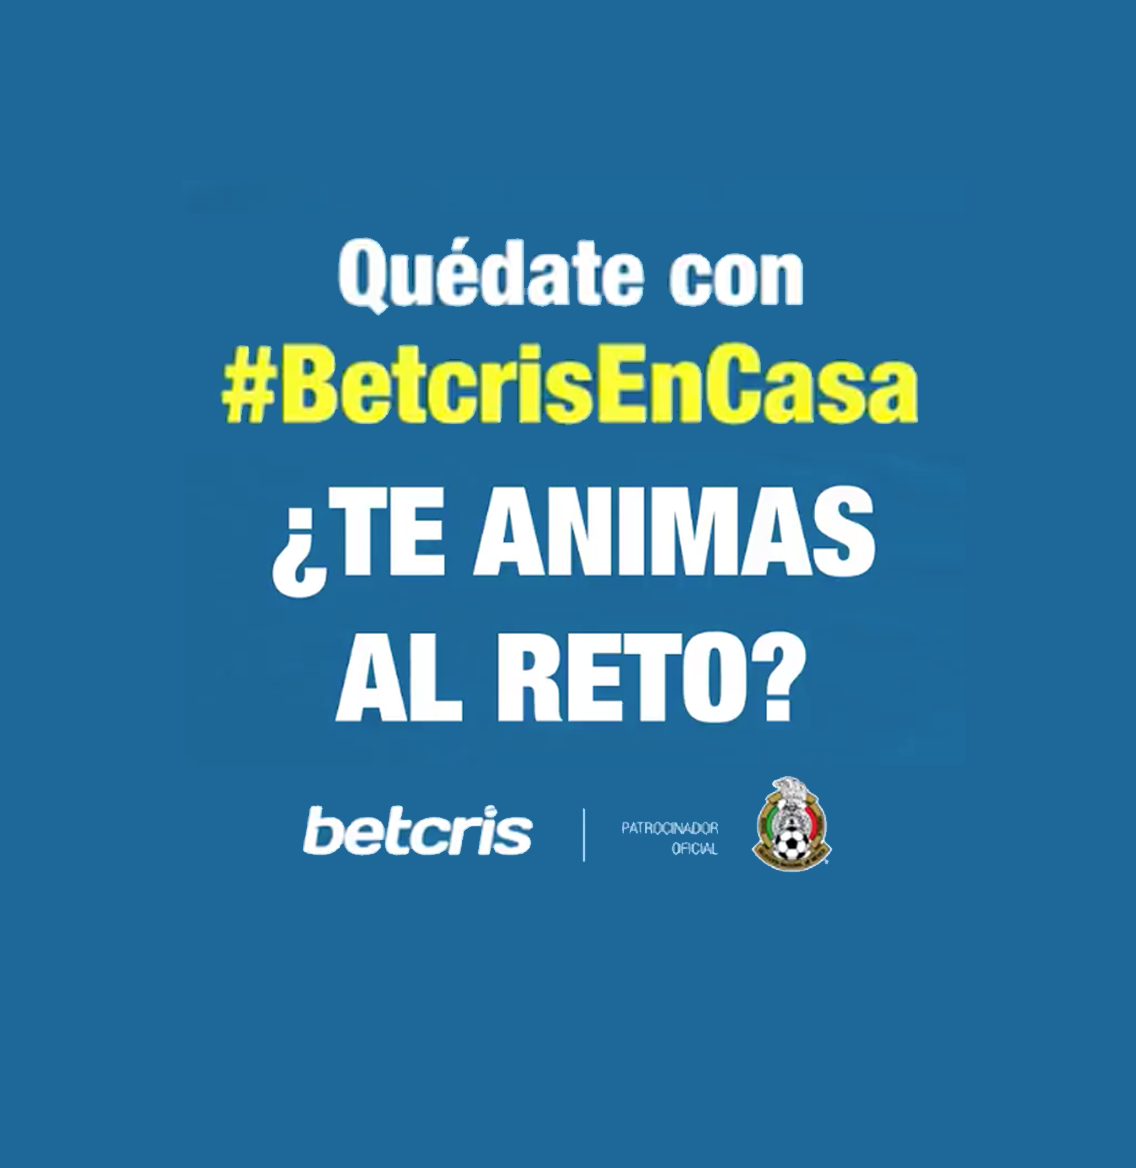 Betcris teams up with Mexican soccer stars for new challenge campaign